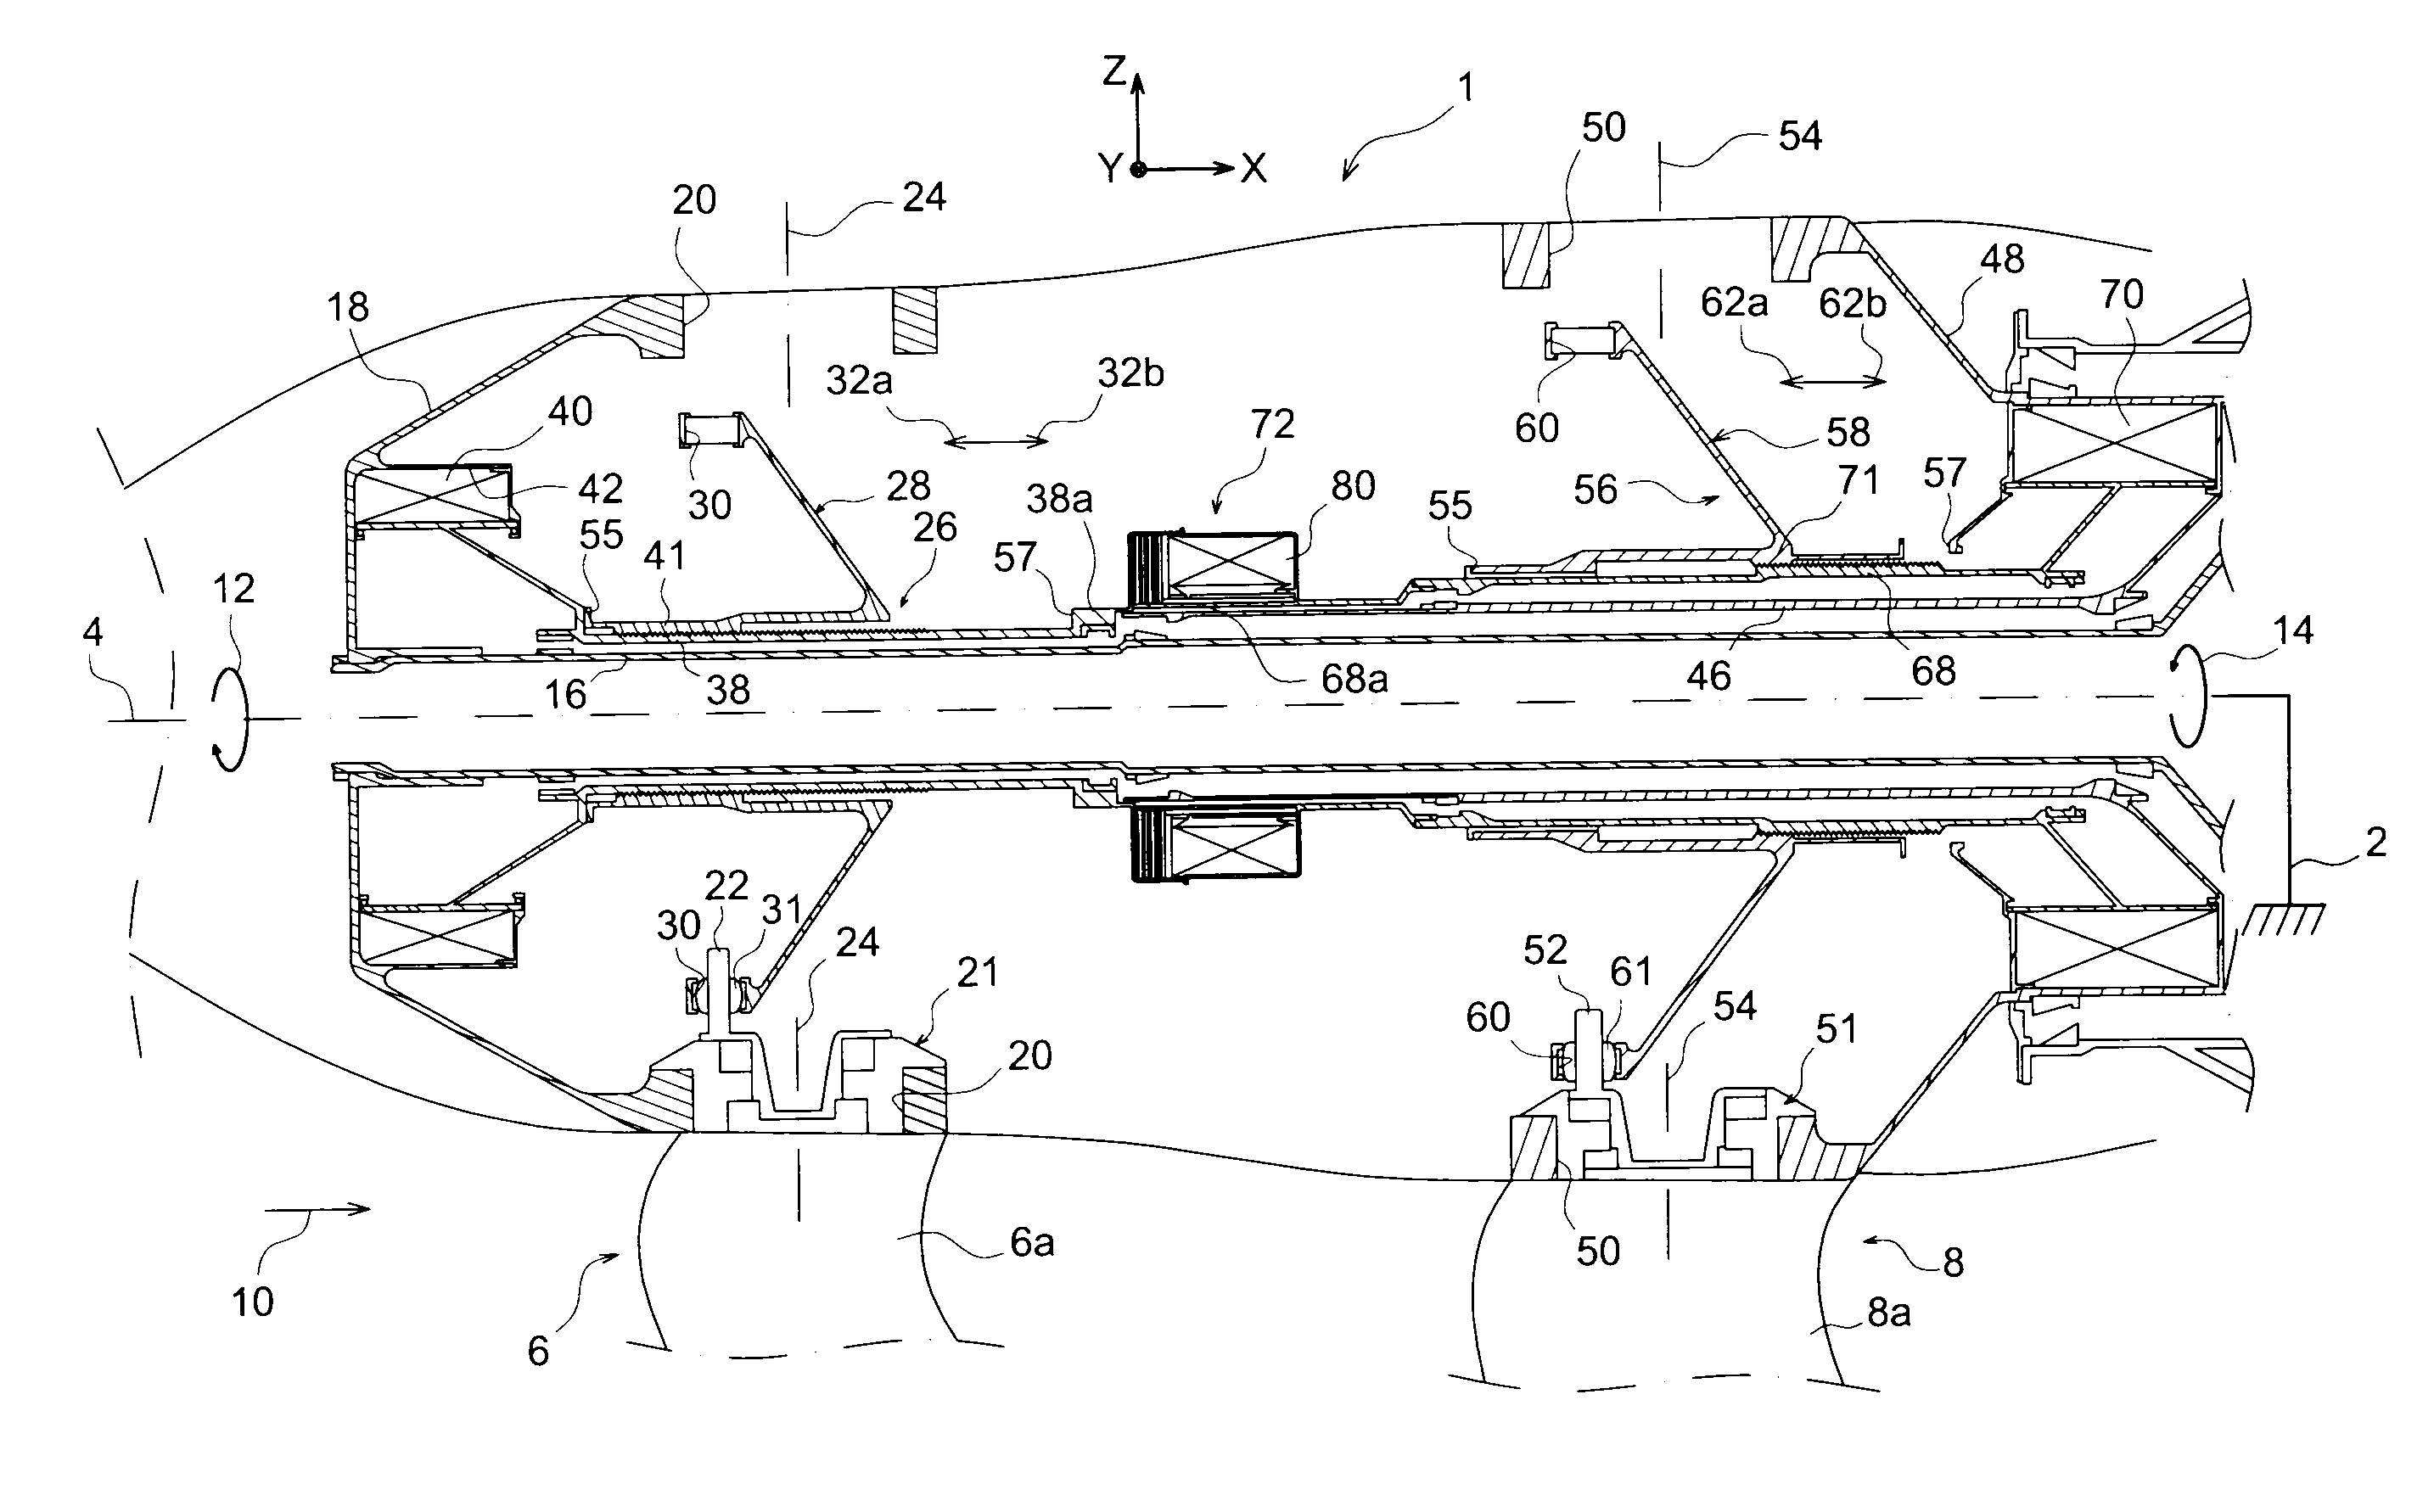 System of counter-rotating propellers with a feathering device for propeller blades